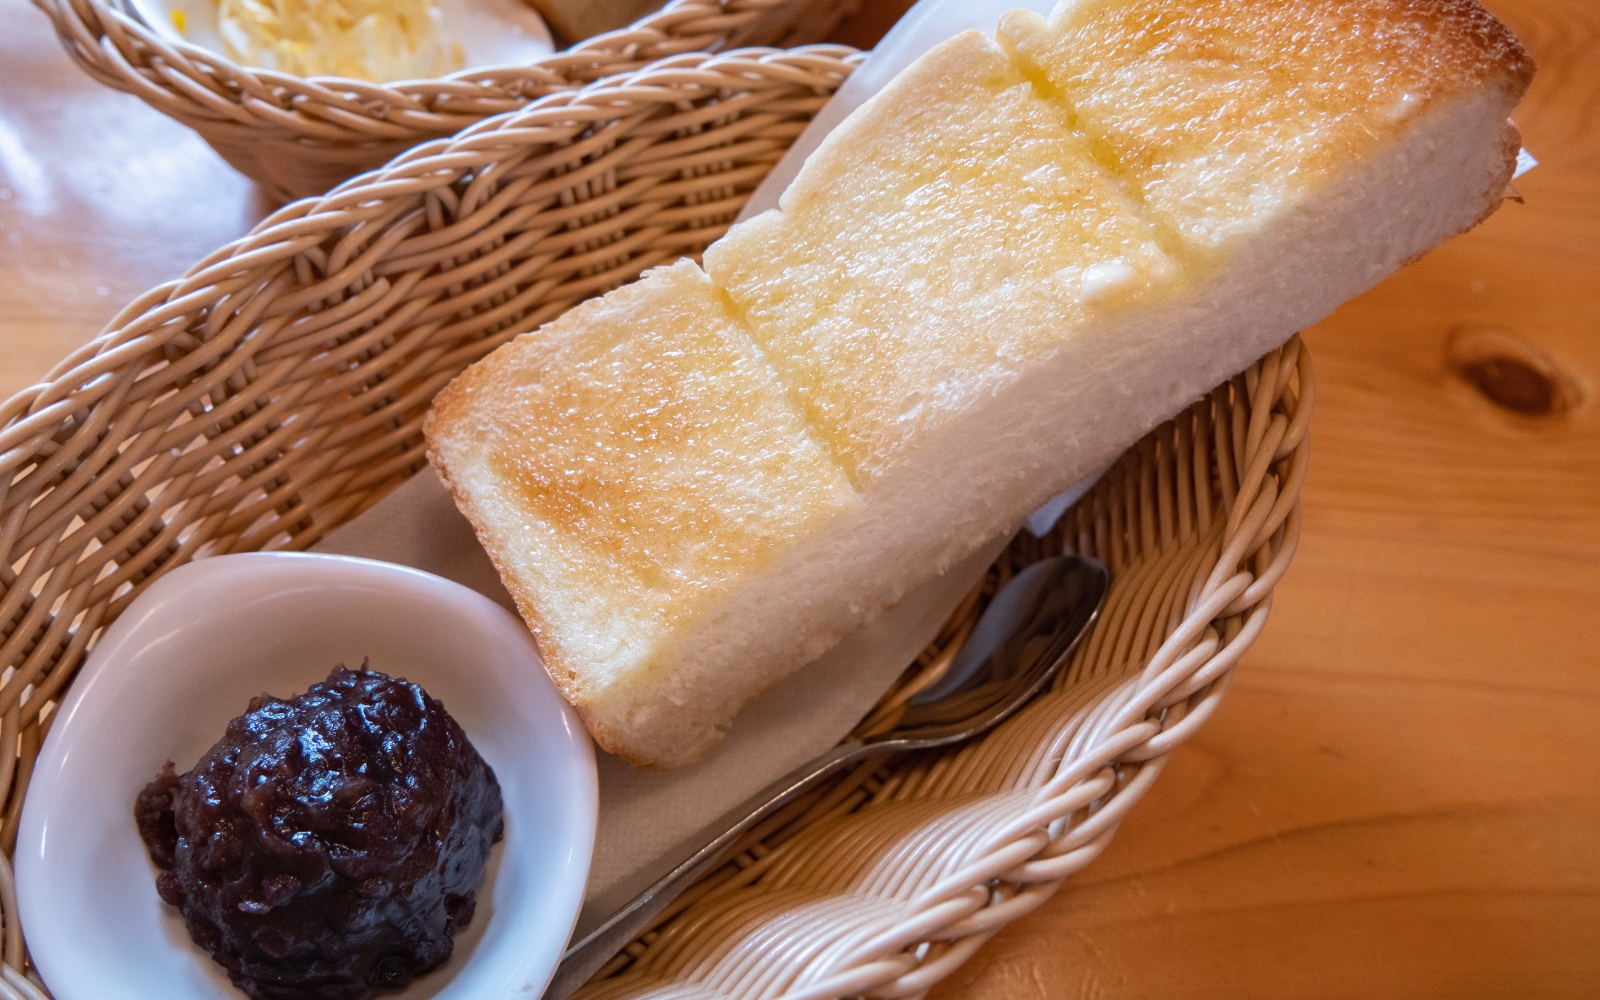 A slice of thick toast topped with sweet red bean paste, known as ogura toast